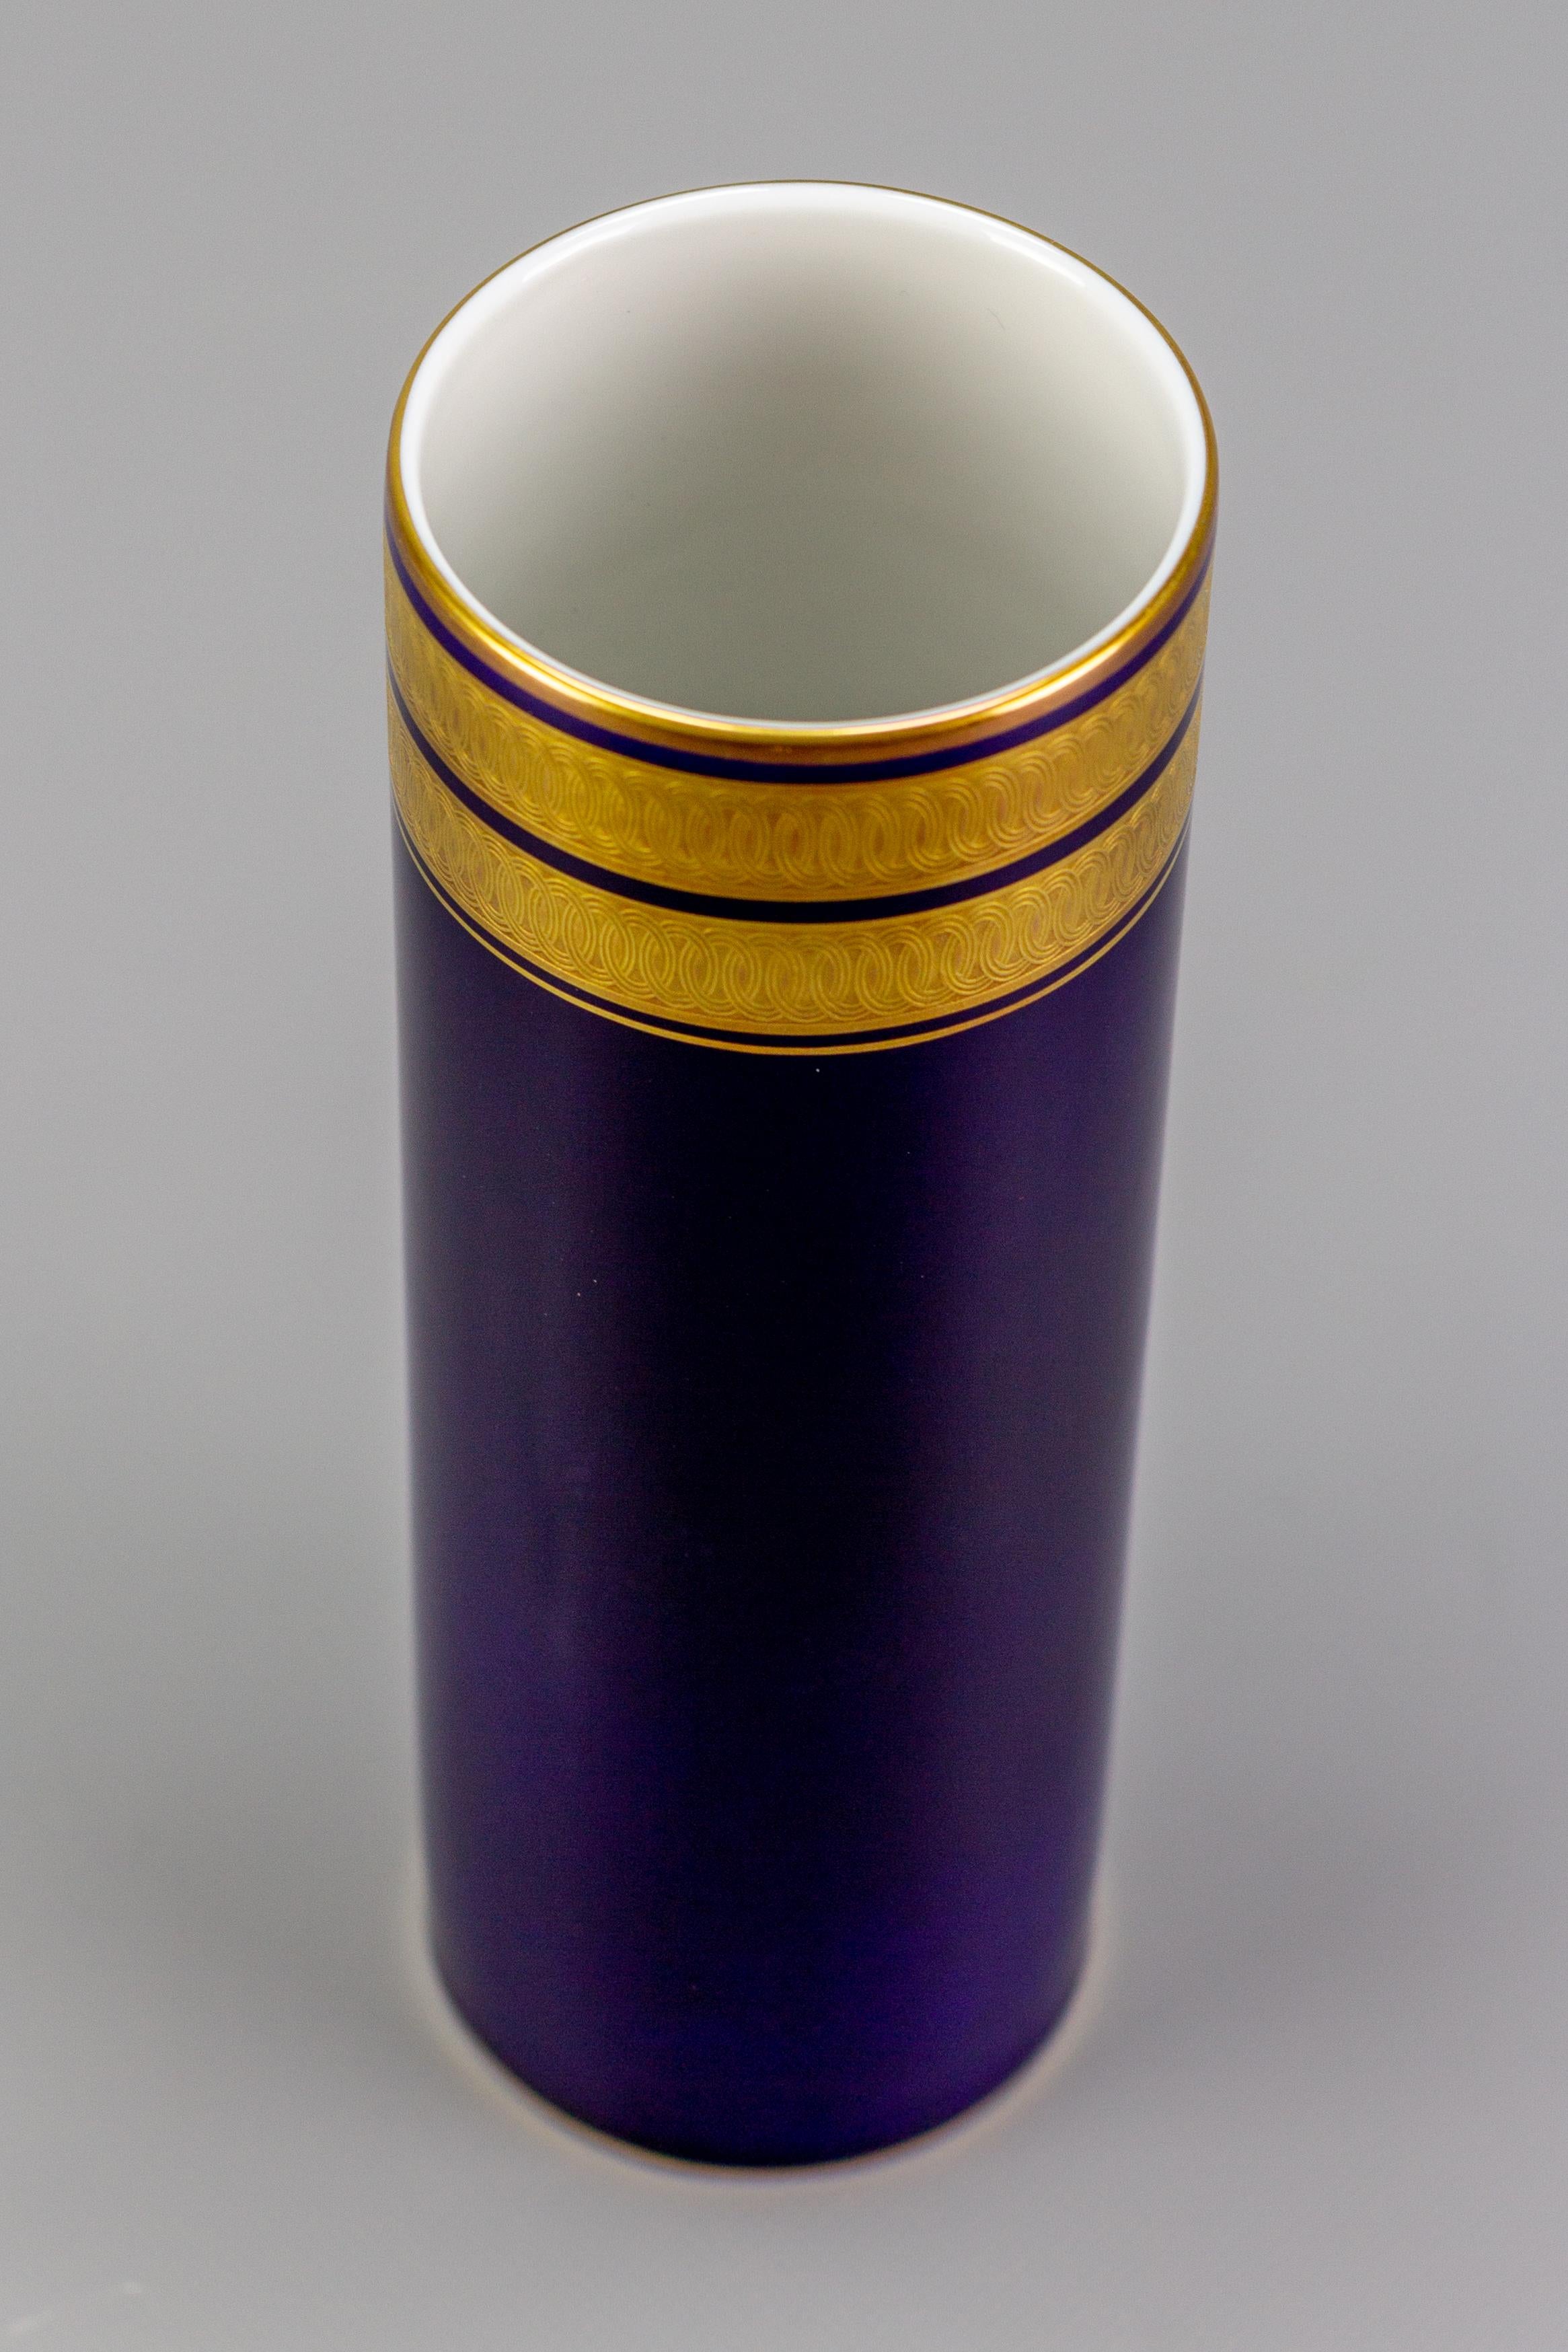 An elegant vase by Hutschenreuther, Germany, 1970s. Cobalt blue, golden ornate trim. Underglaze green maker's mark and numbers 138/23 and 604502 on the underside. 
Dimensions: height: 25.5 cm / 10.04 in; diameter: 8 cm / 3.15 in.